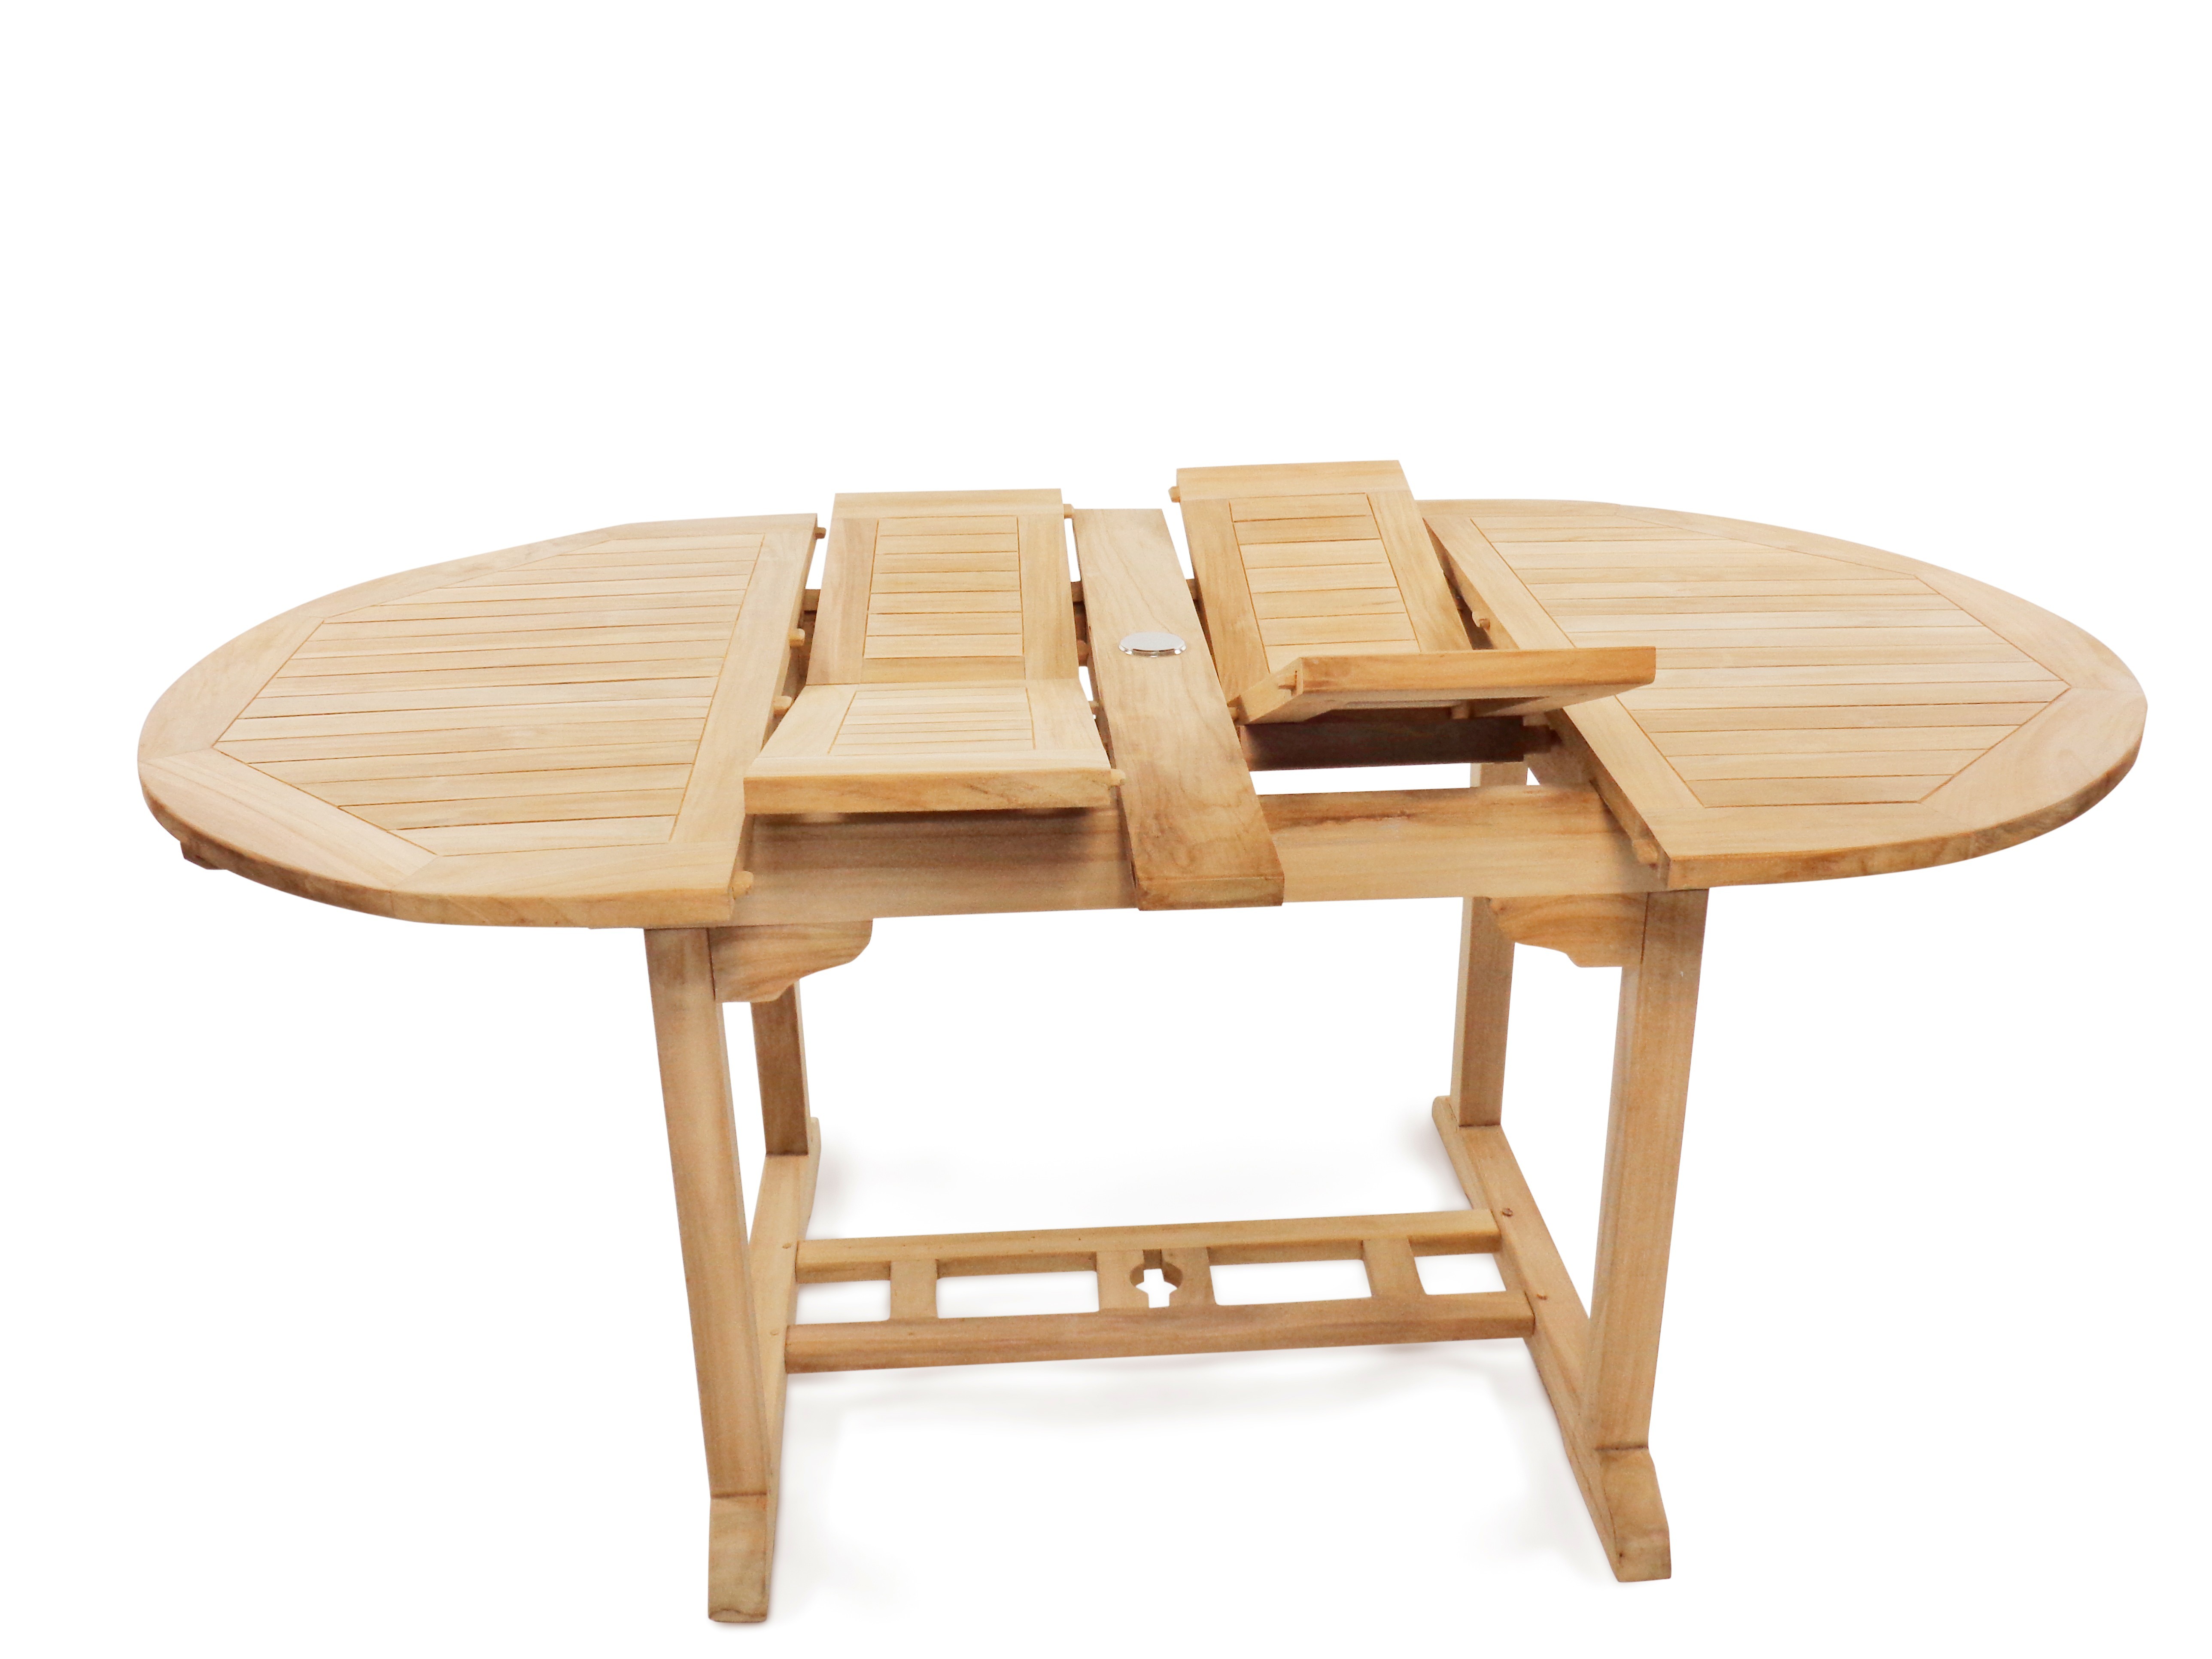 Grade A Teak Bimini Counter Height 66" x 39" Double Leaf Oval Extension Table...Seats 6...makes 3 Different Size Tables